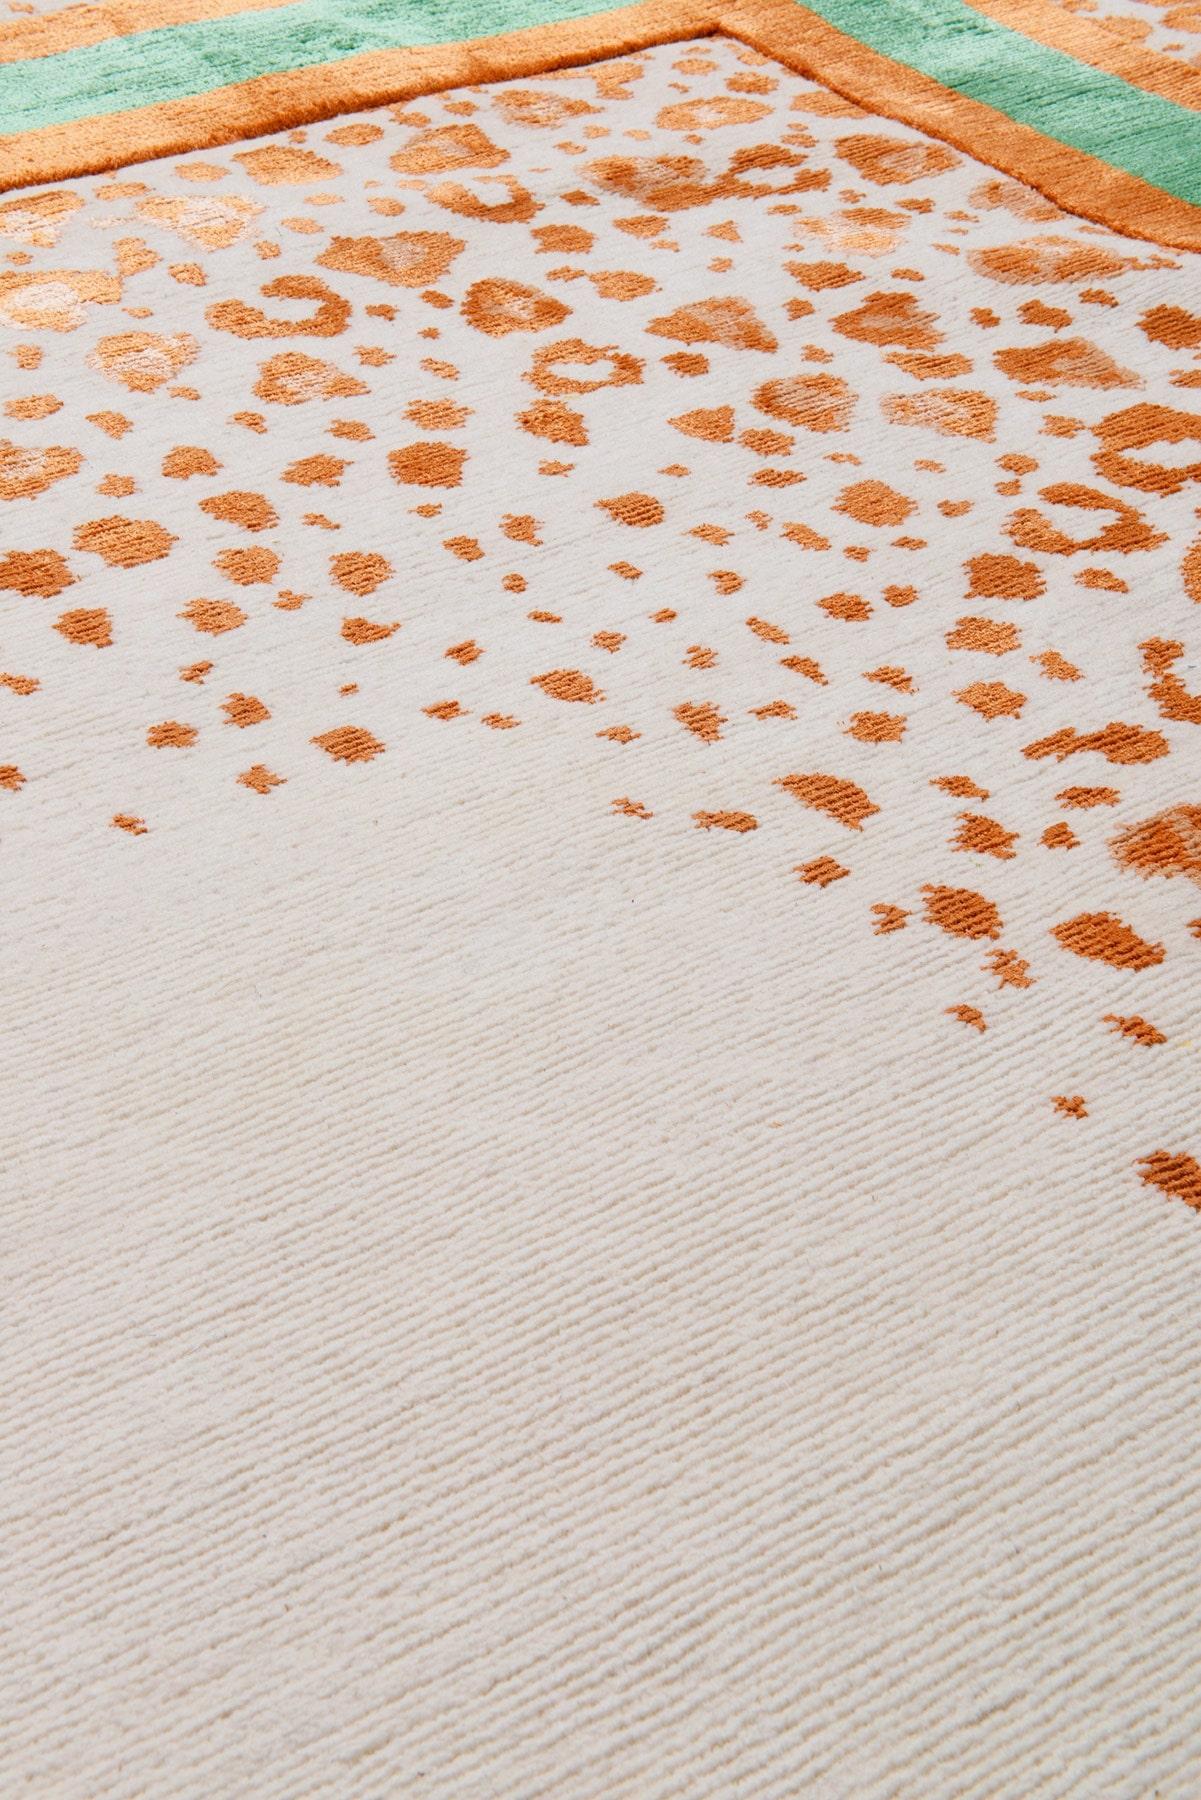 In striking green and orange hues, Panthera features a bricolage of delicate silk animal prints, which freckle over the woollen base. With a nod to ancient mythology, this multifaceted design incites intrigue and a sense of tamed revelry.
 